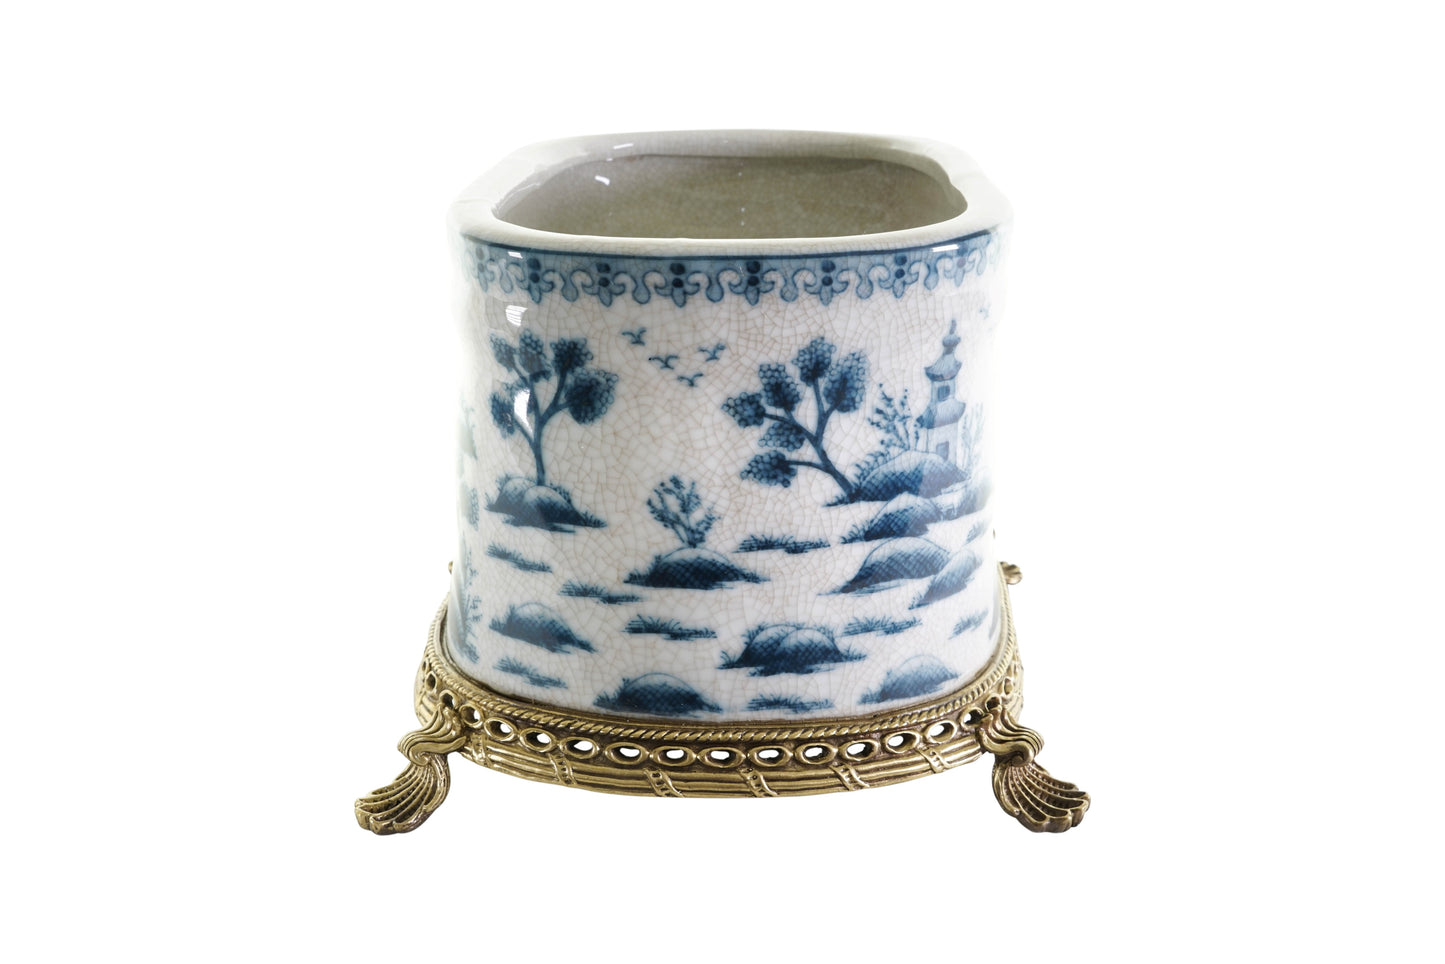 Oval Crackle Blue and White Blue Willow Porcelain Flower Pot Brass Ormolu 7.5"